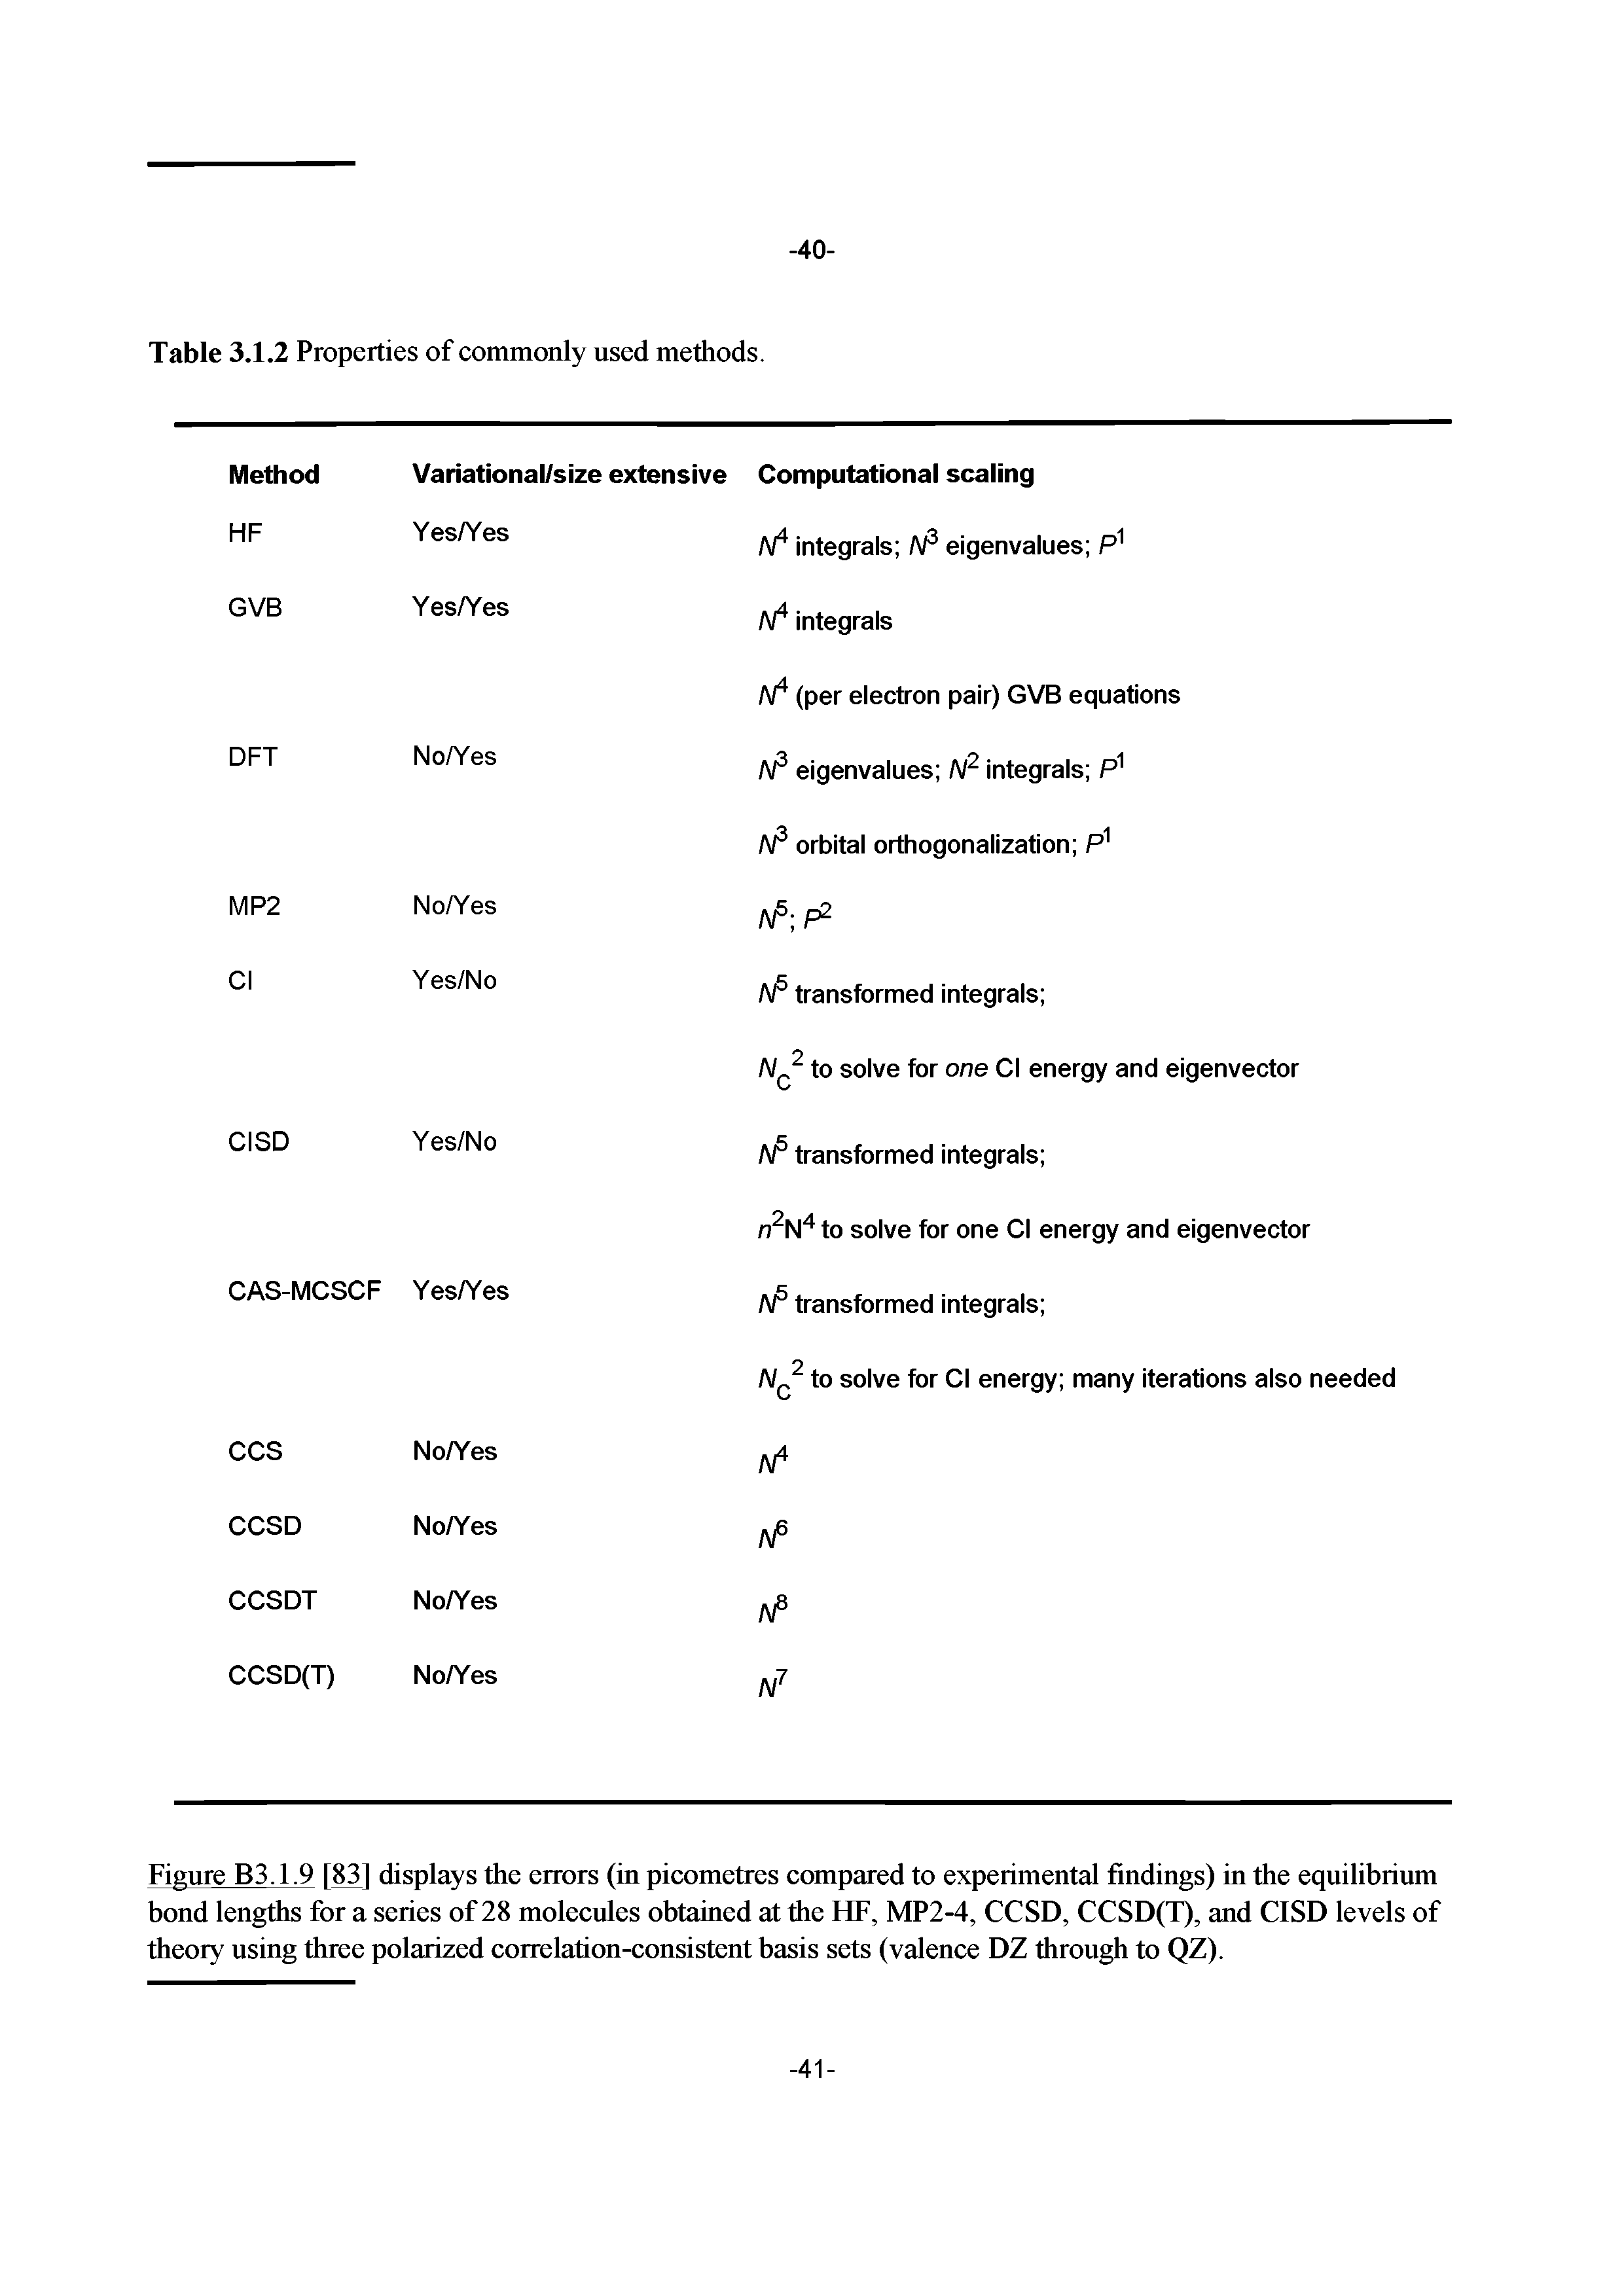 Figure B3.1.9 [83] displays the errors (in picometres compared to experimental findings) in the equilibrium bond lengths for a series of 28 molecules obtained at the HF, MP2-4, CCSD, CCSD(T), and CISD levels of theory using three polarized correlation-consistent basis sets (valence DZ through to QZ).